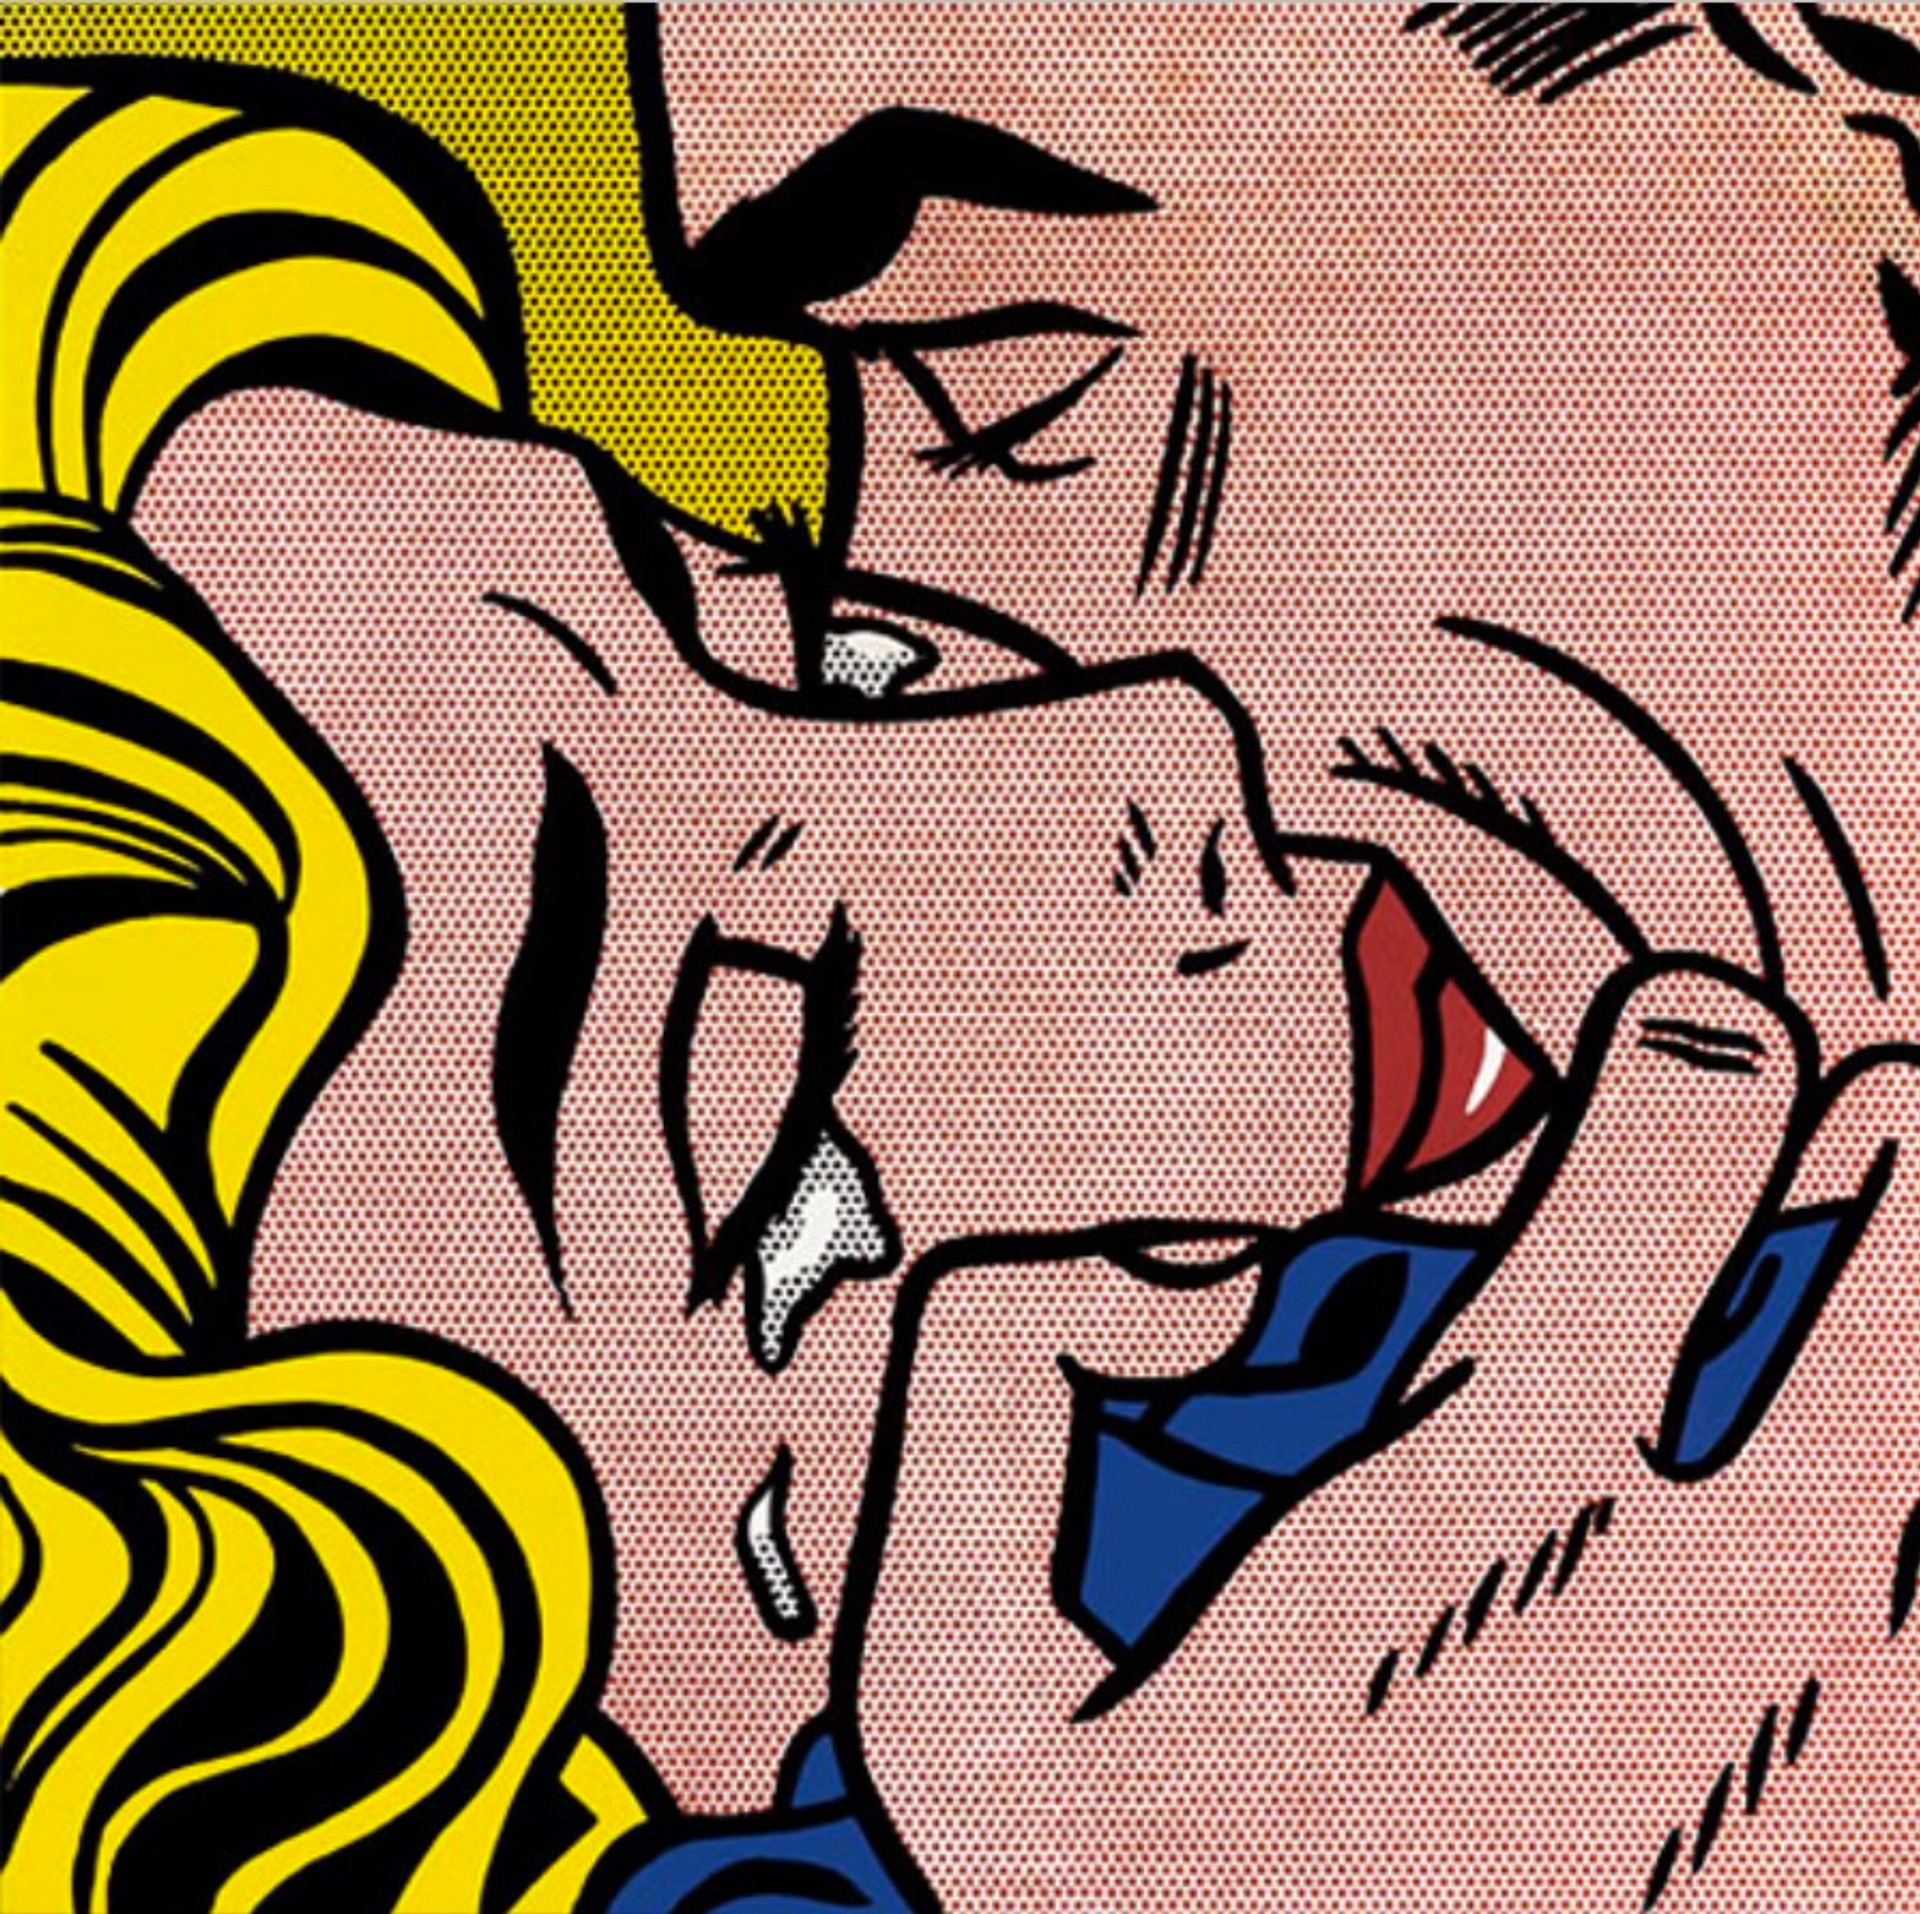 This work by Roy Lichtenstein shows a close-up of a couple tightly embracing as the blonde woman sheds a few tears.